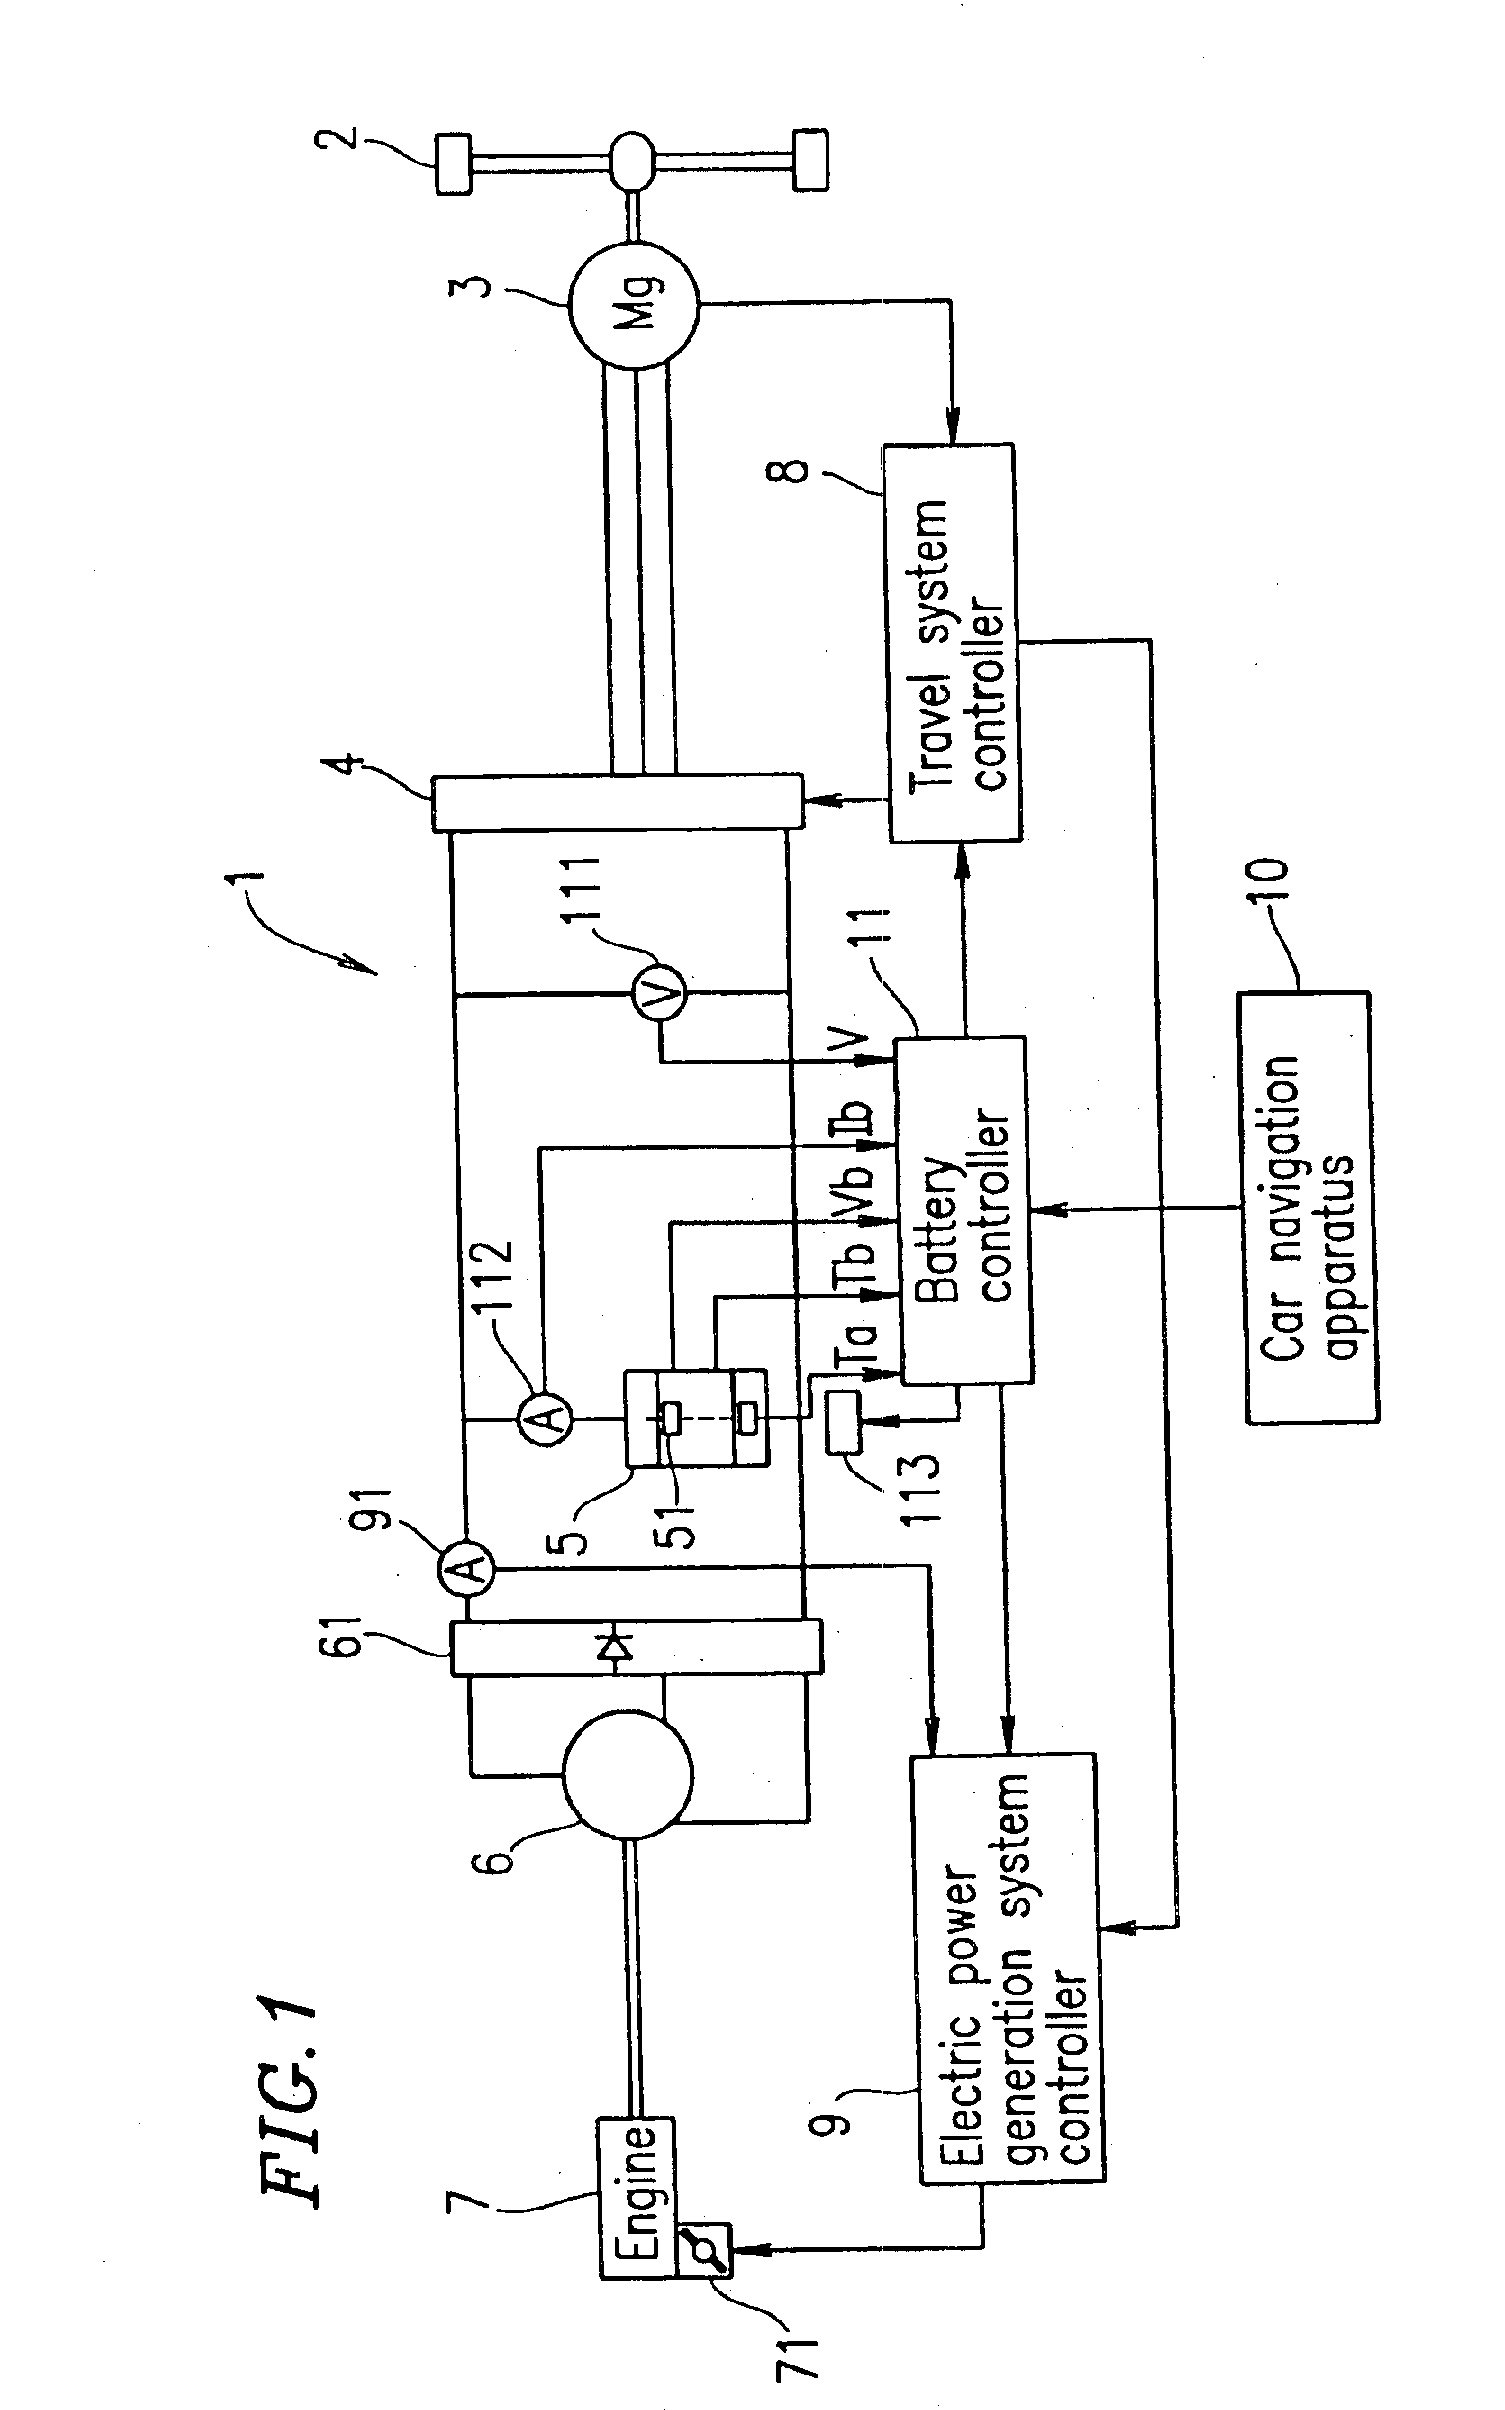 Apparatus for controlling hybrid electric vehicle